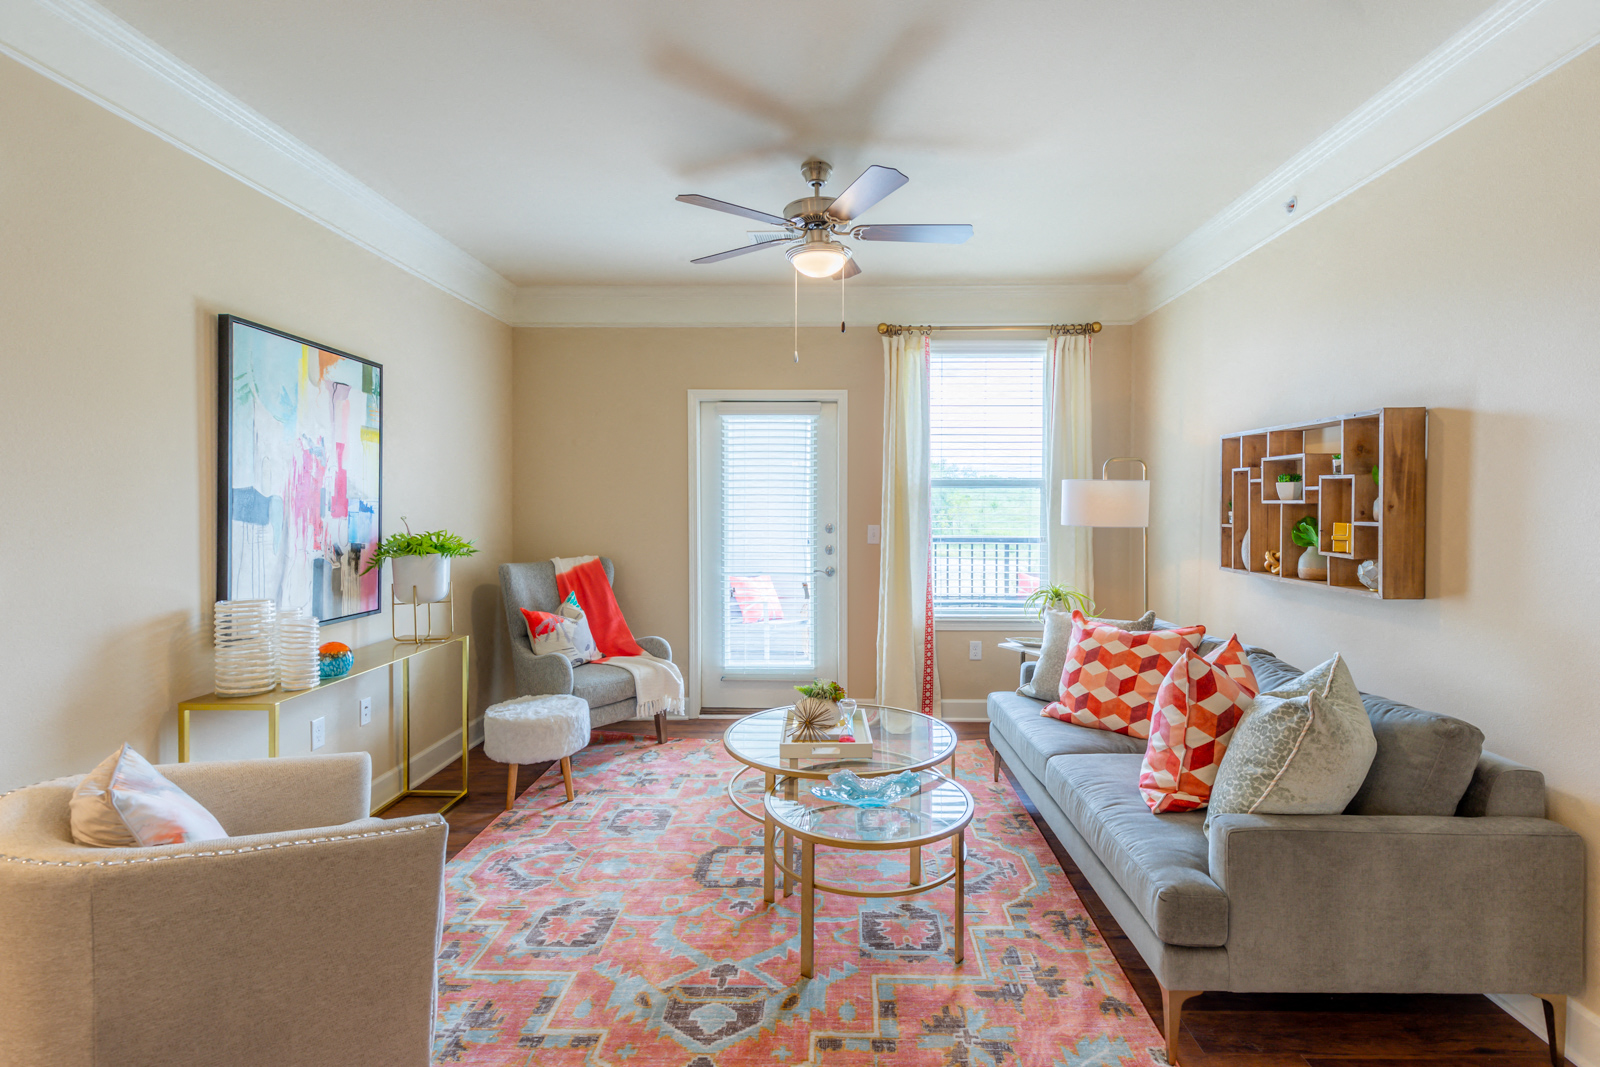 Living Room With Ceiling Fan at The Residences at Bluhawk Apartments, Overland Park, 66085